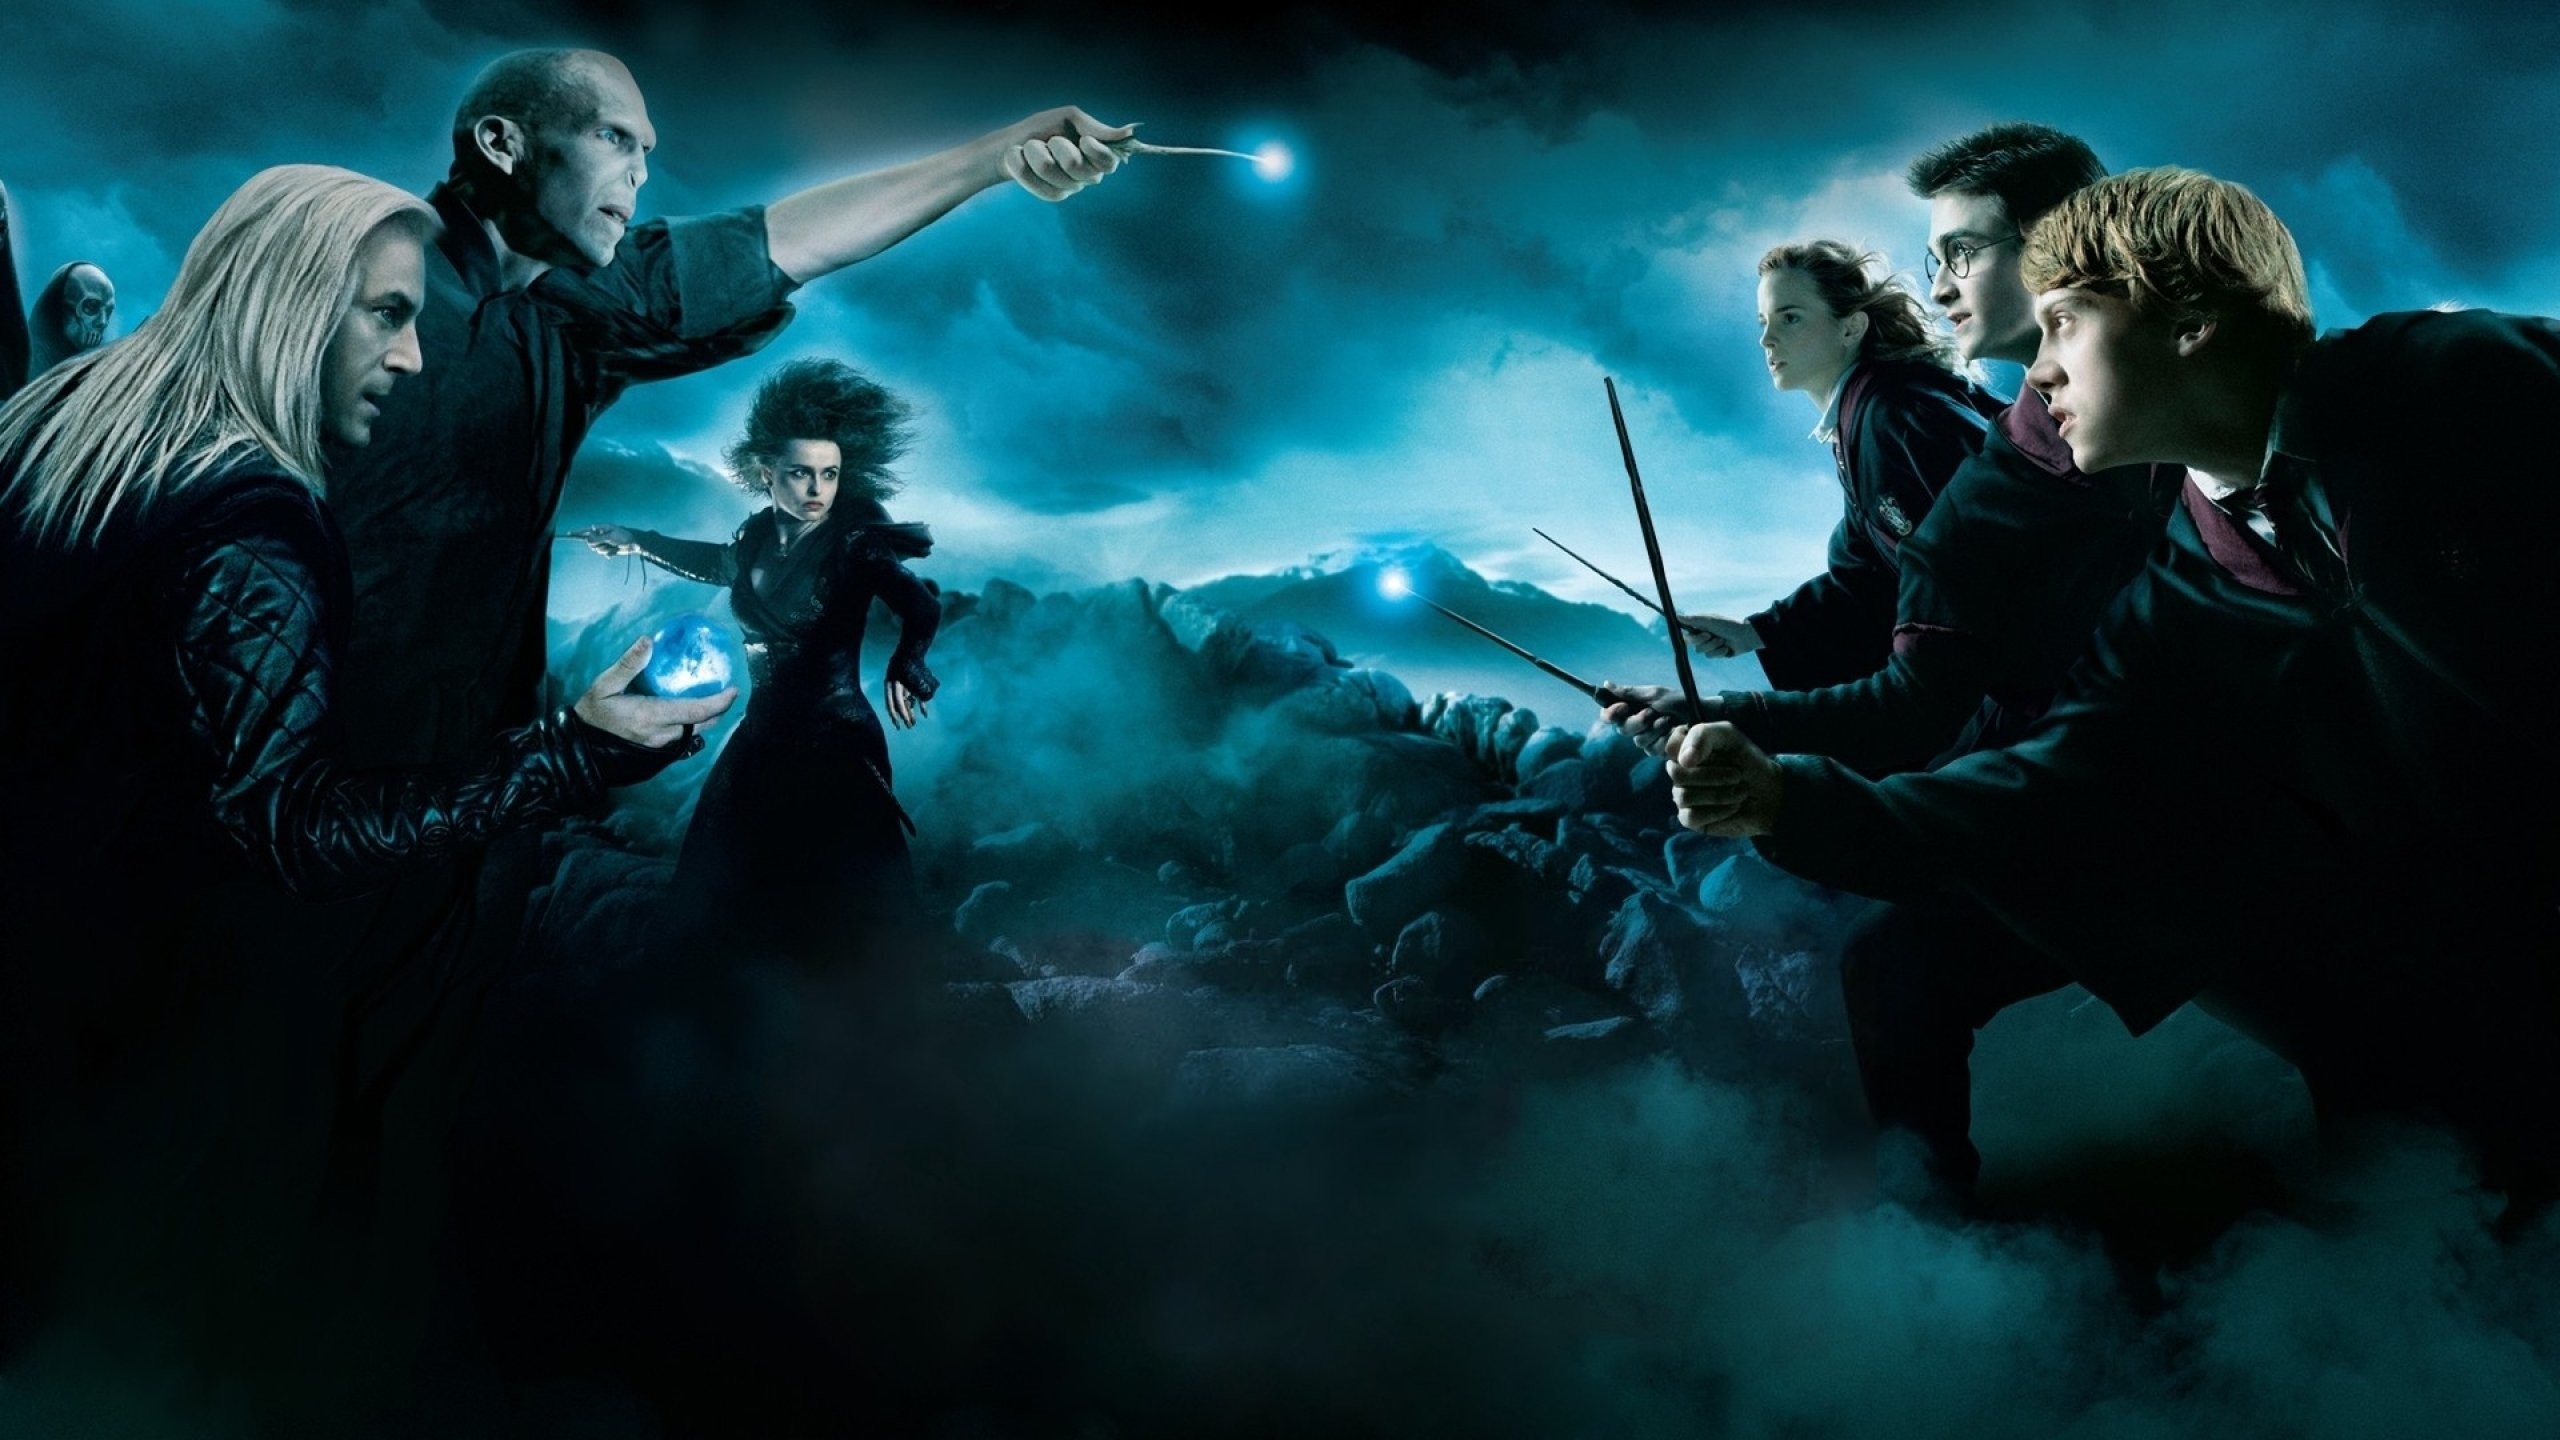 harry potter wallpaper for walls,movie,sky,darkness,cg artwork,photography